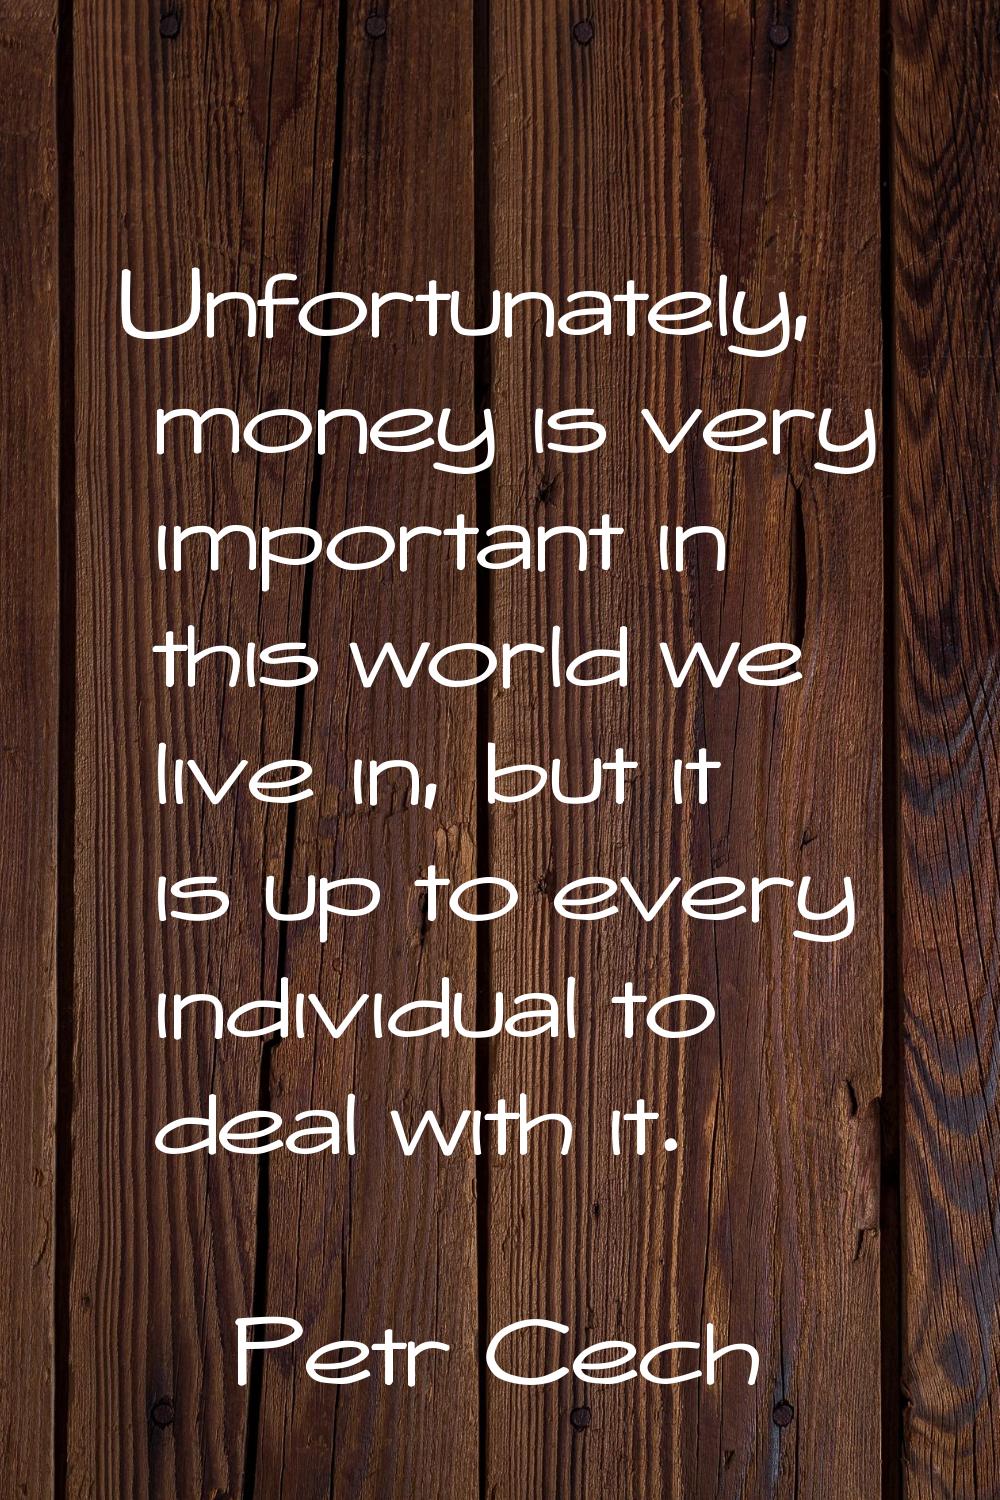 Unfortunately, money is very important in this world we live in, but it is up to every individual t